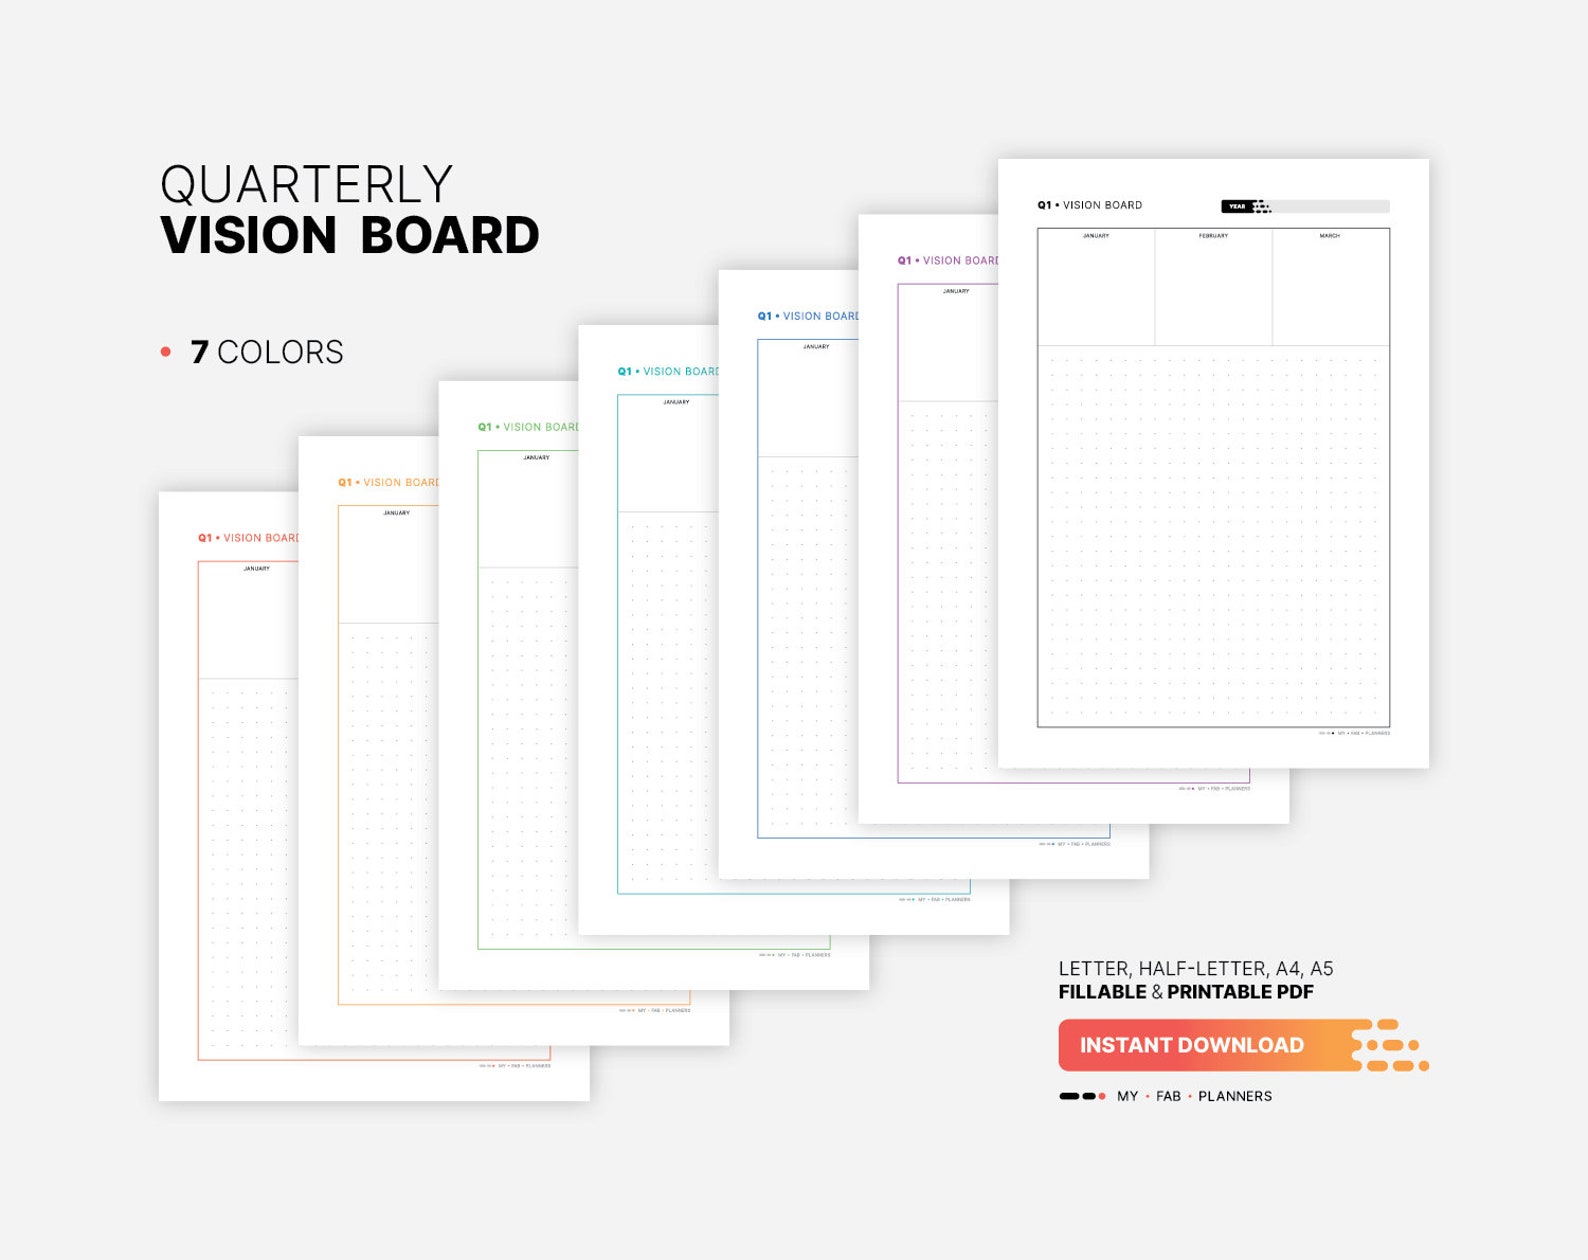 Quarterly Vision Board With 3-month Plan, Fillable Goal Dashboard ...